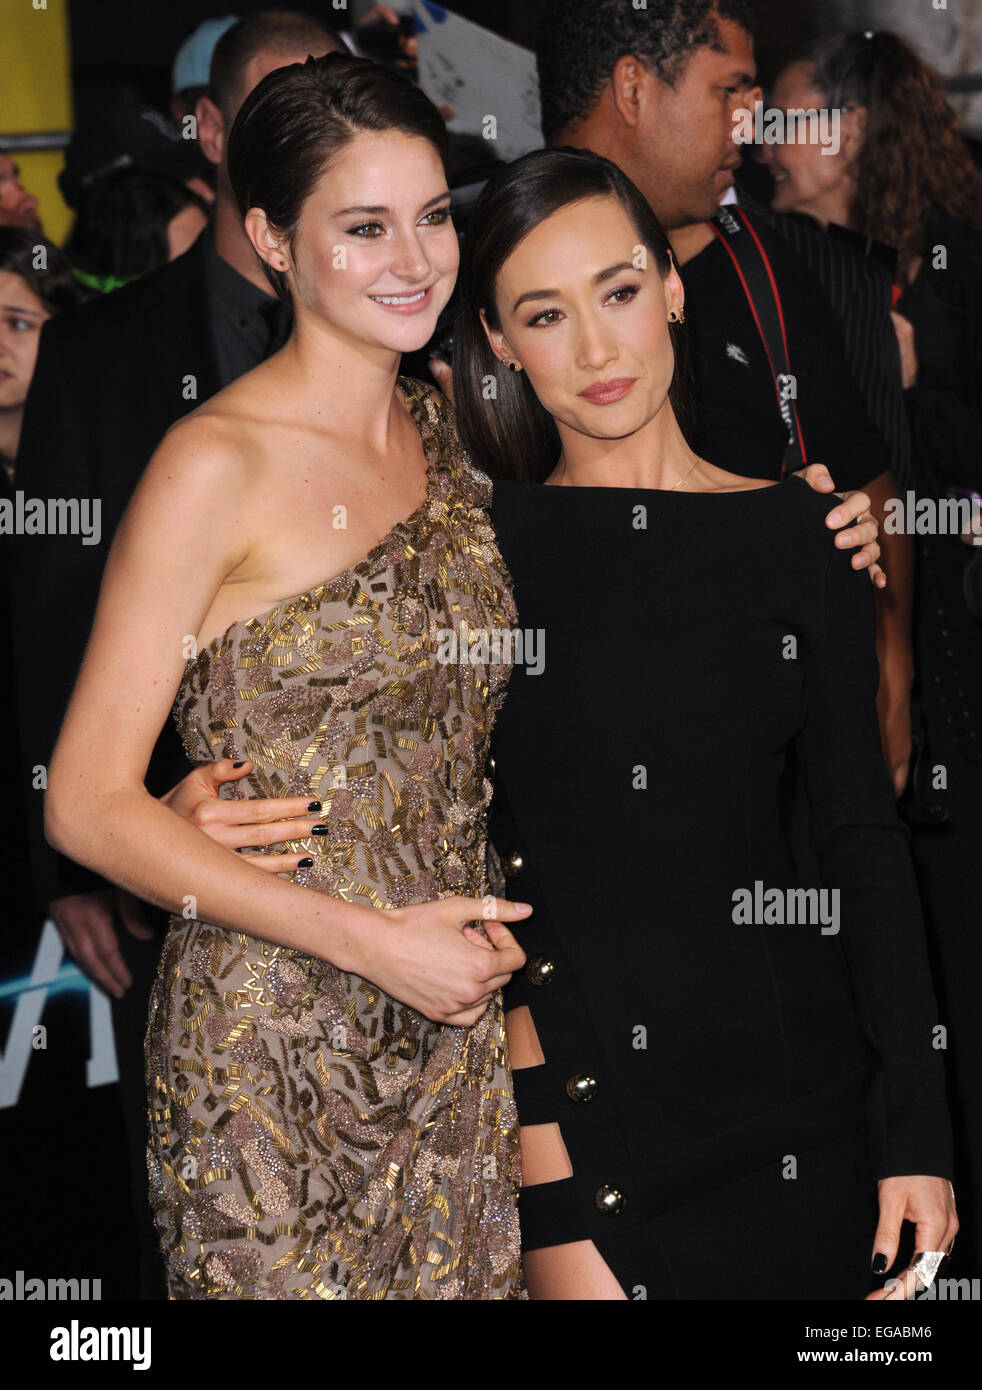 LOS ANGELES, CA - MARCH 18, 2014: Shailene Woodley & Maggie Q (right) at the Los Angeles premiere of their movie 'Divergent' at the Regency Bruin Theatre, Westwood. Stock Photo